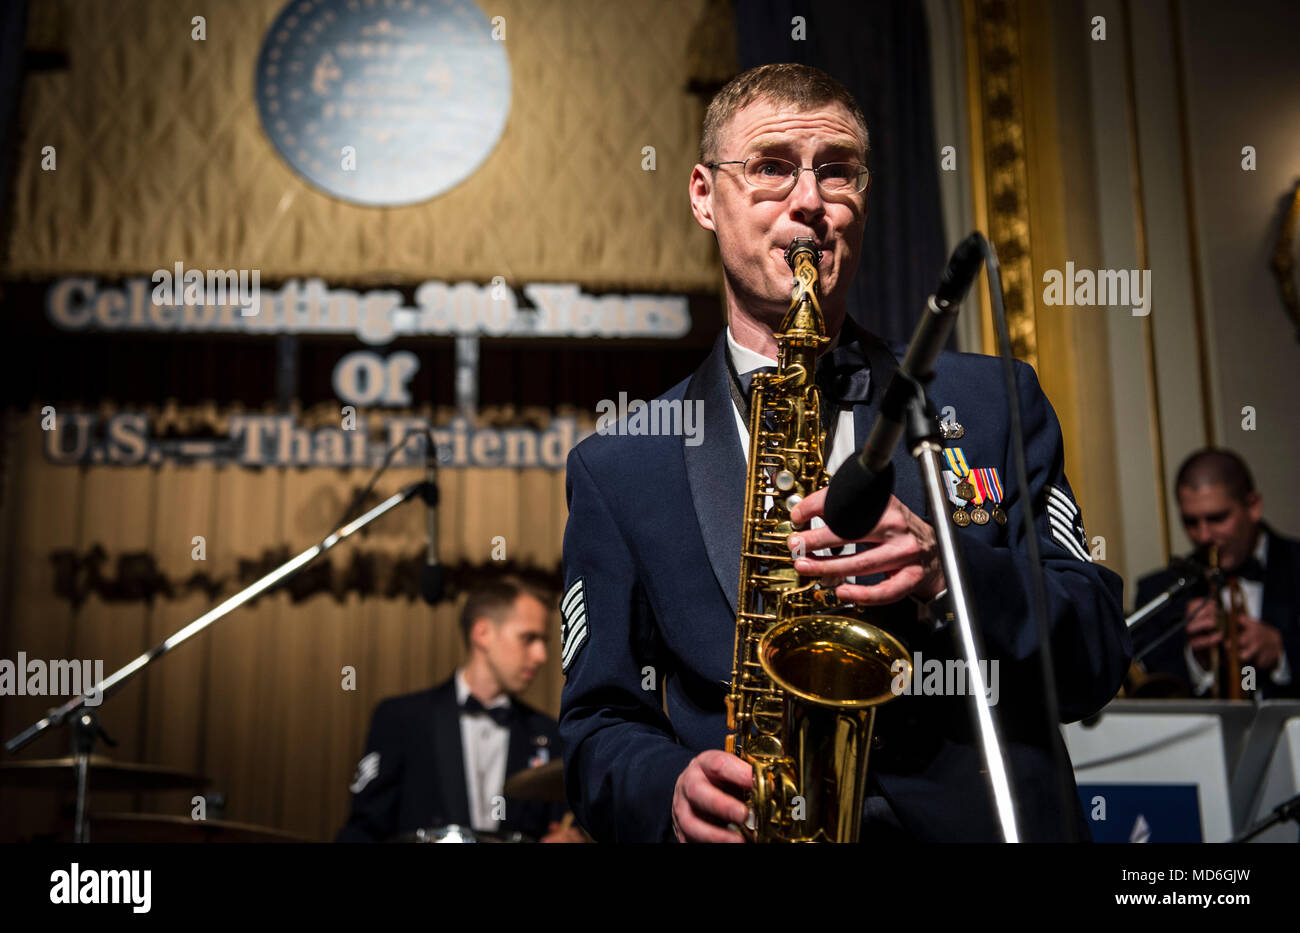 180323-F-PW498-001 BANGKOK, THAILAND (Mar. 23, 2018) Technical Sergeant Ron Glenn, a regional saxophonist assigned to the U.S. Air Force Band of the Pacific, performs at a gala at the Mandarin Oriental Hotel in Bangkok, Thailand. The band is in Thailand as part of the U.S. Embassy’s 200th Anniversary Celebration of Friendship between the U.S. and Kingdom of Thailand. (U.S. Air Force photo by Technical Sergeant Mariko Frazee/Released) Stock Photo